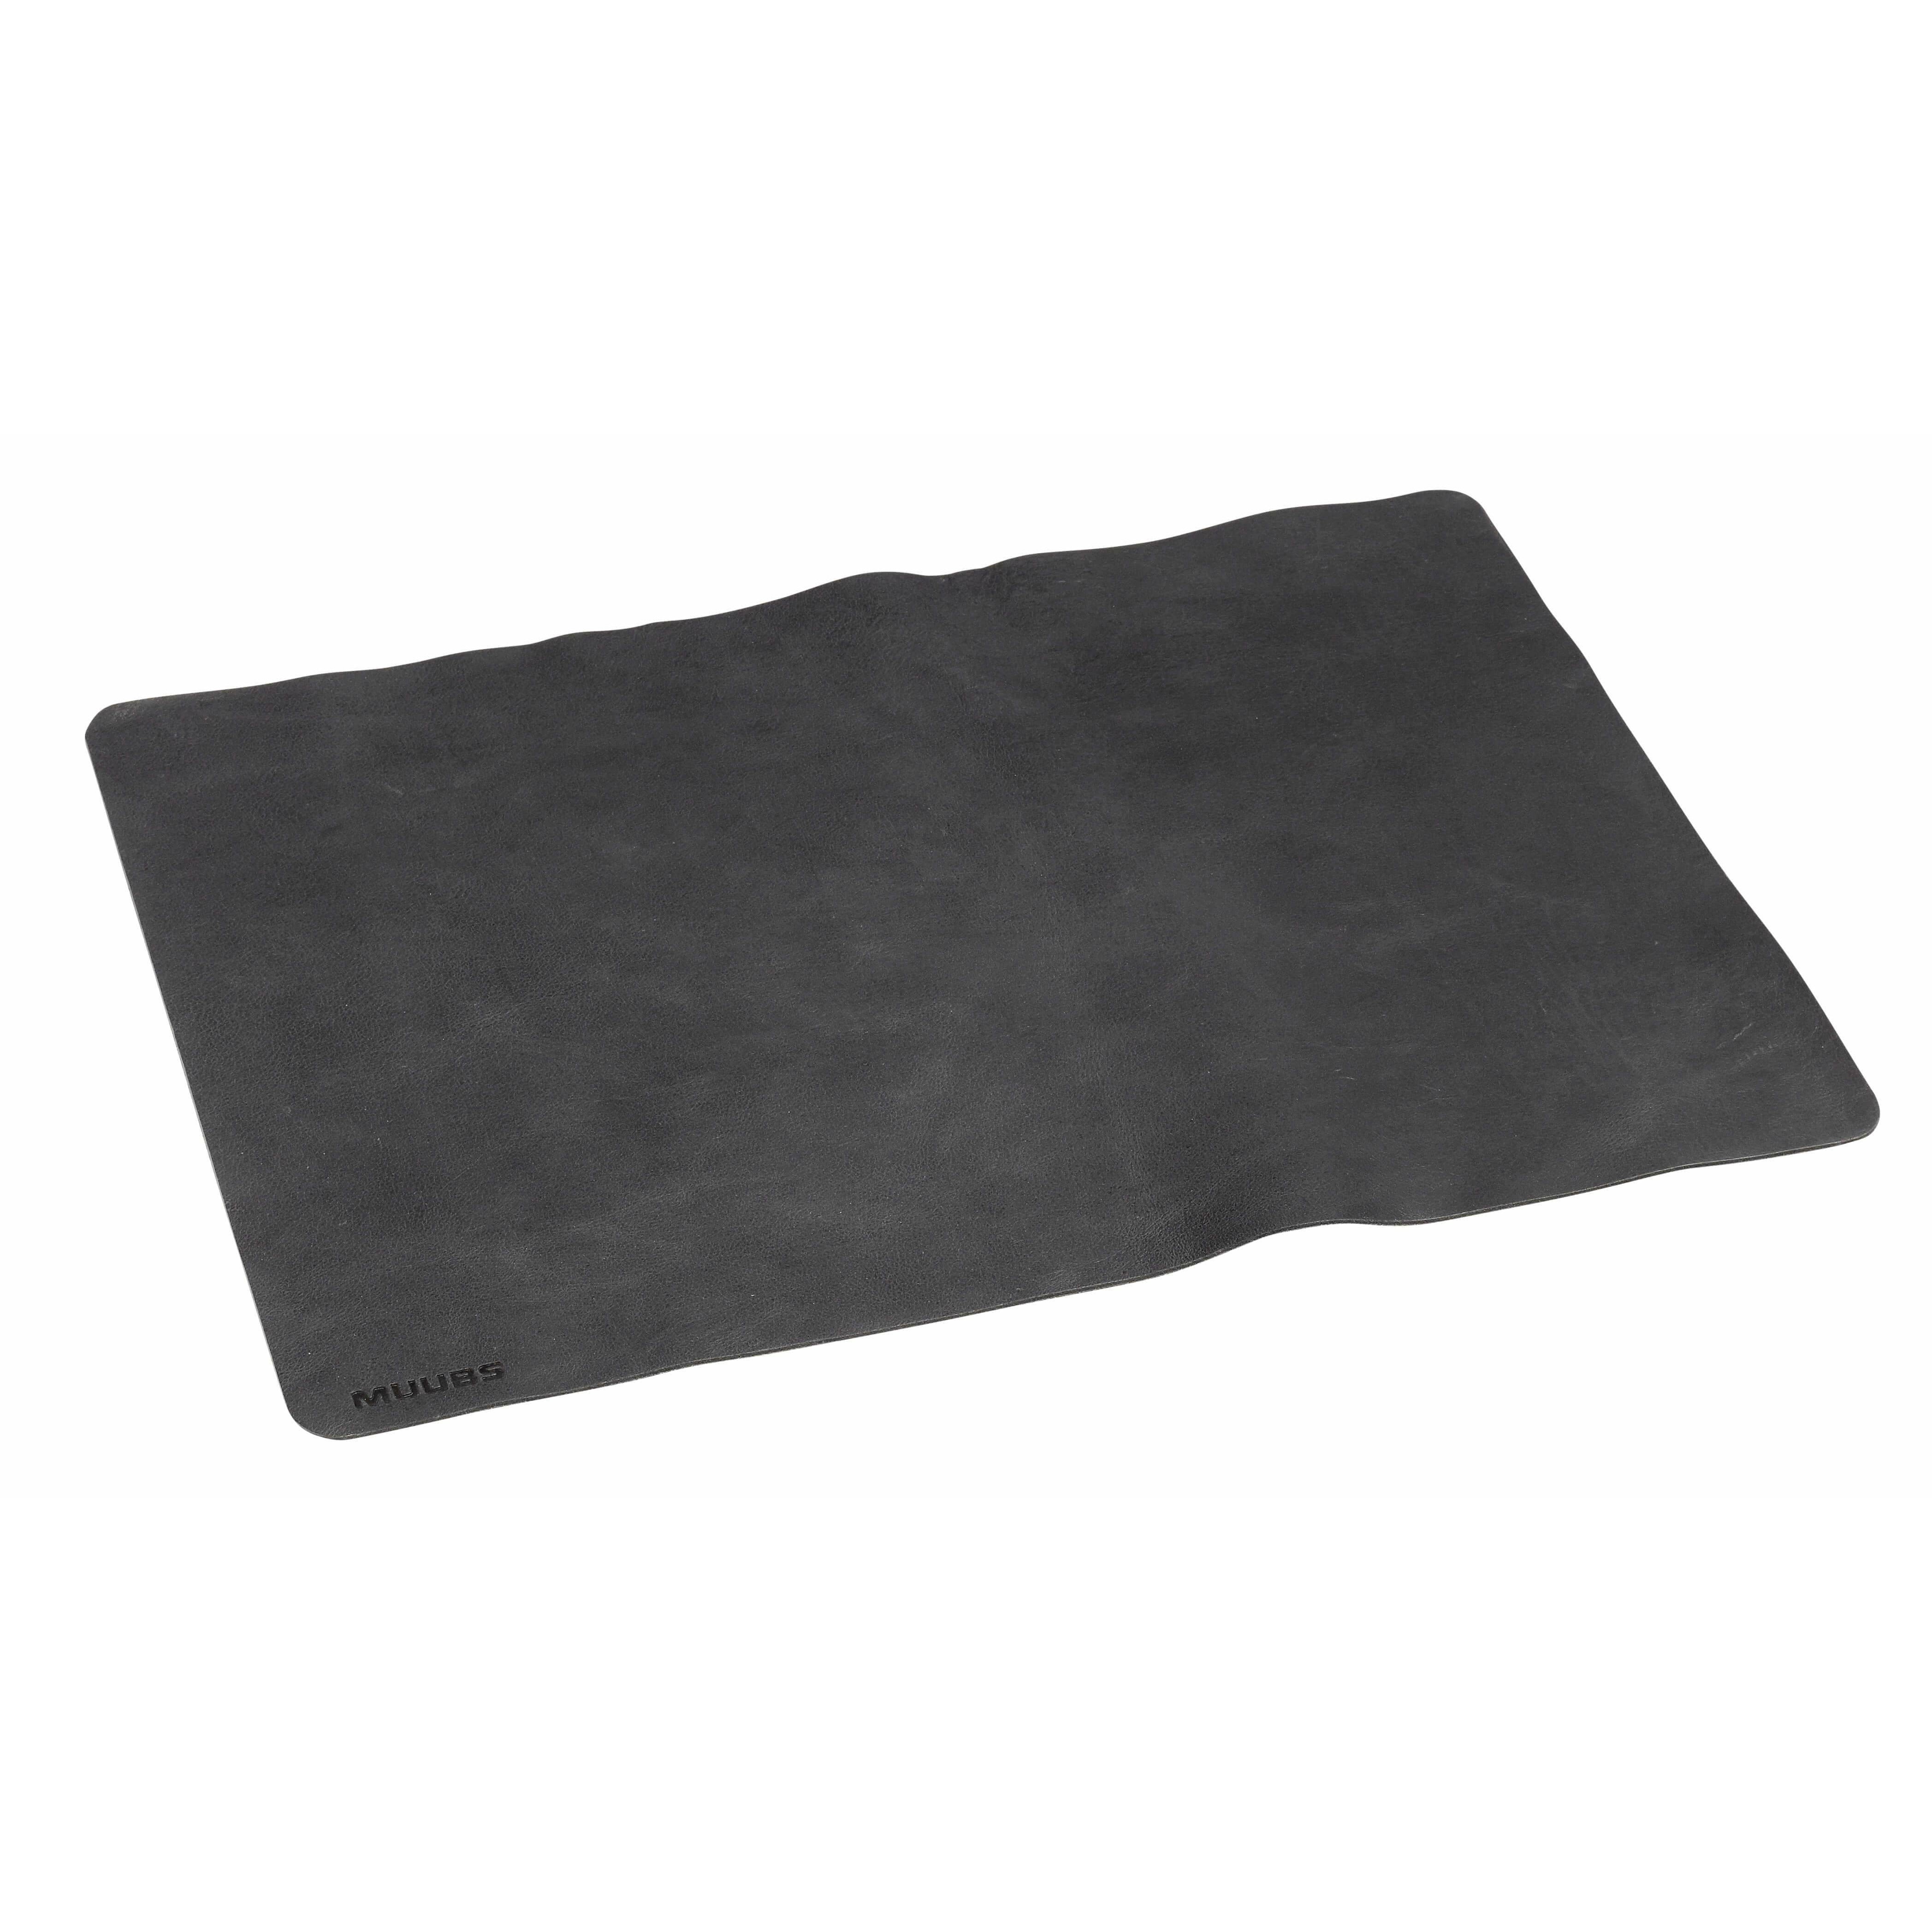 Muubs Camou Placemat 45cm, Black Leather